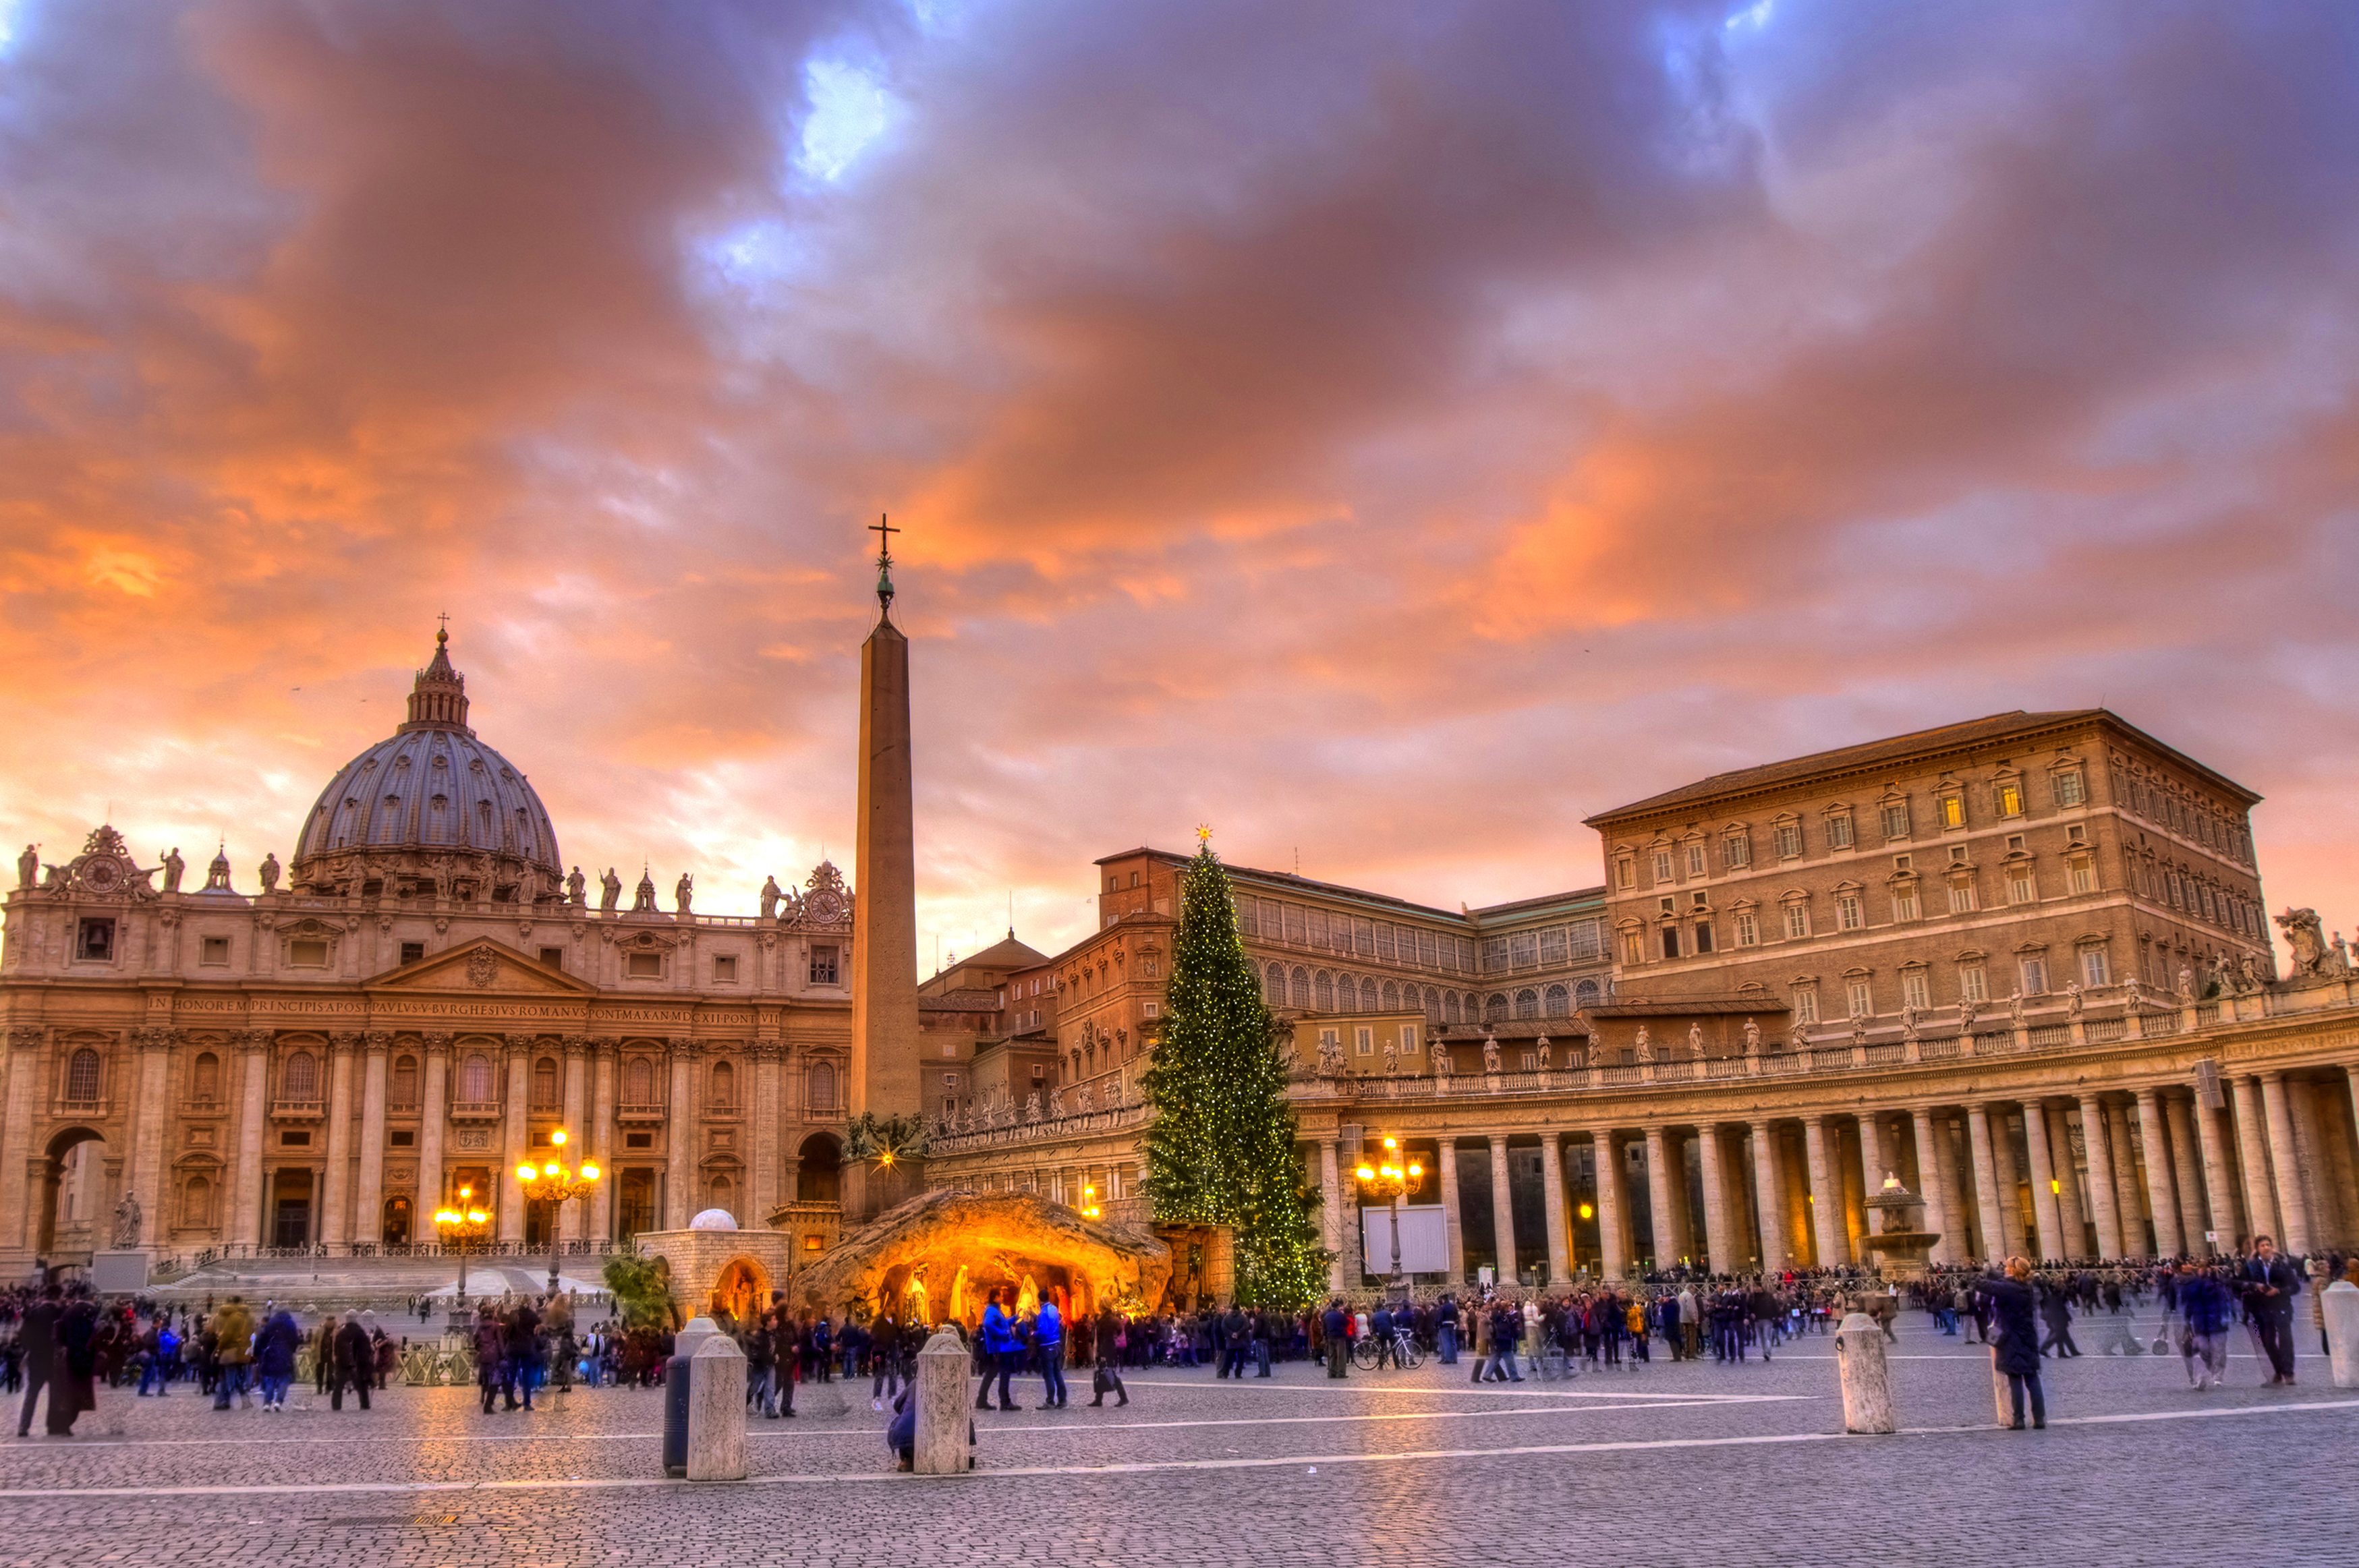 saint-peters-square-in-rome-at-christmas-vatican-city-italy